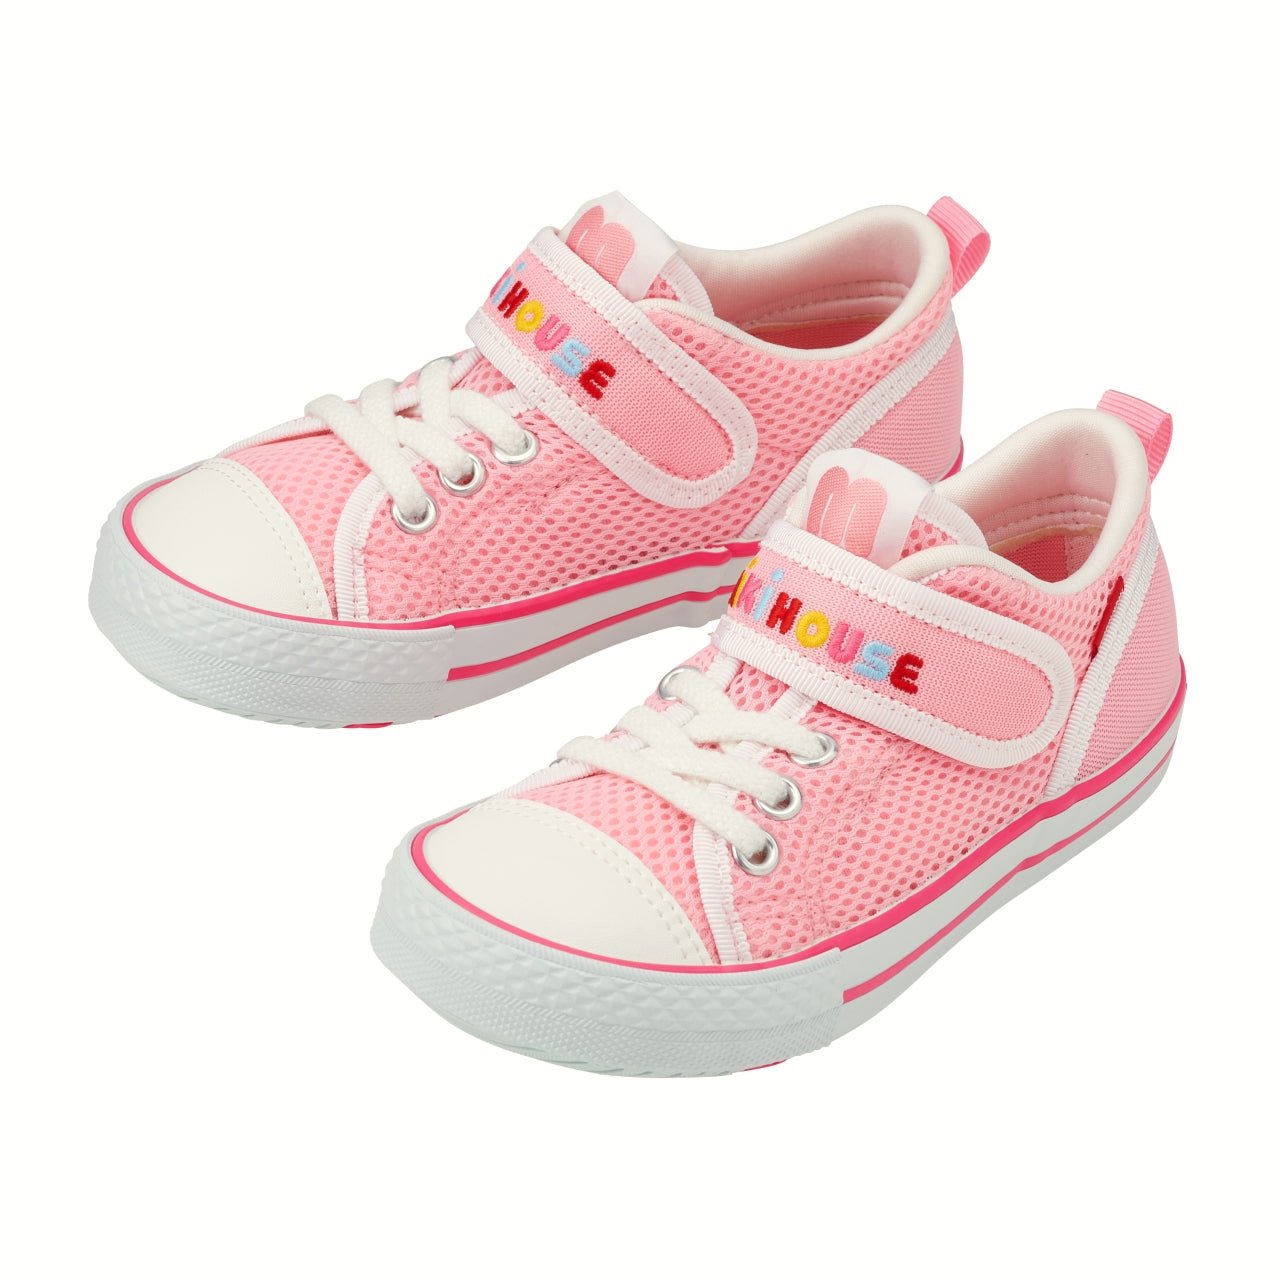 Double Russell Mesh Sneakers for Kids - Strawberry Milk - MIKI HOUSE USA